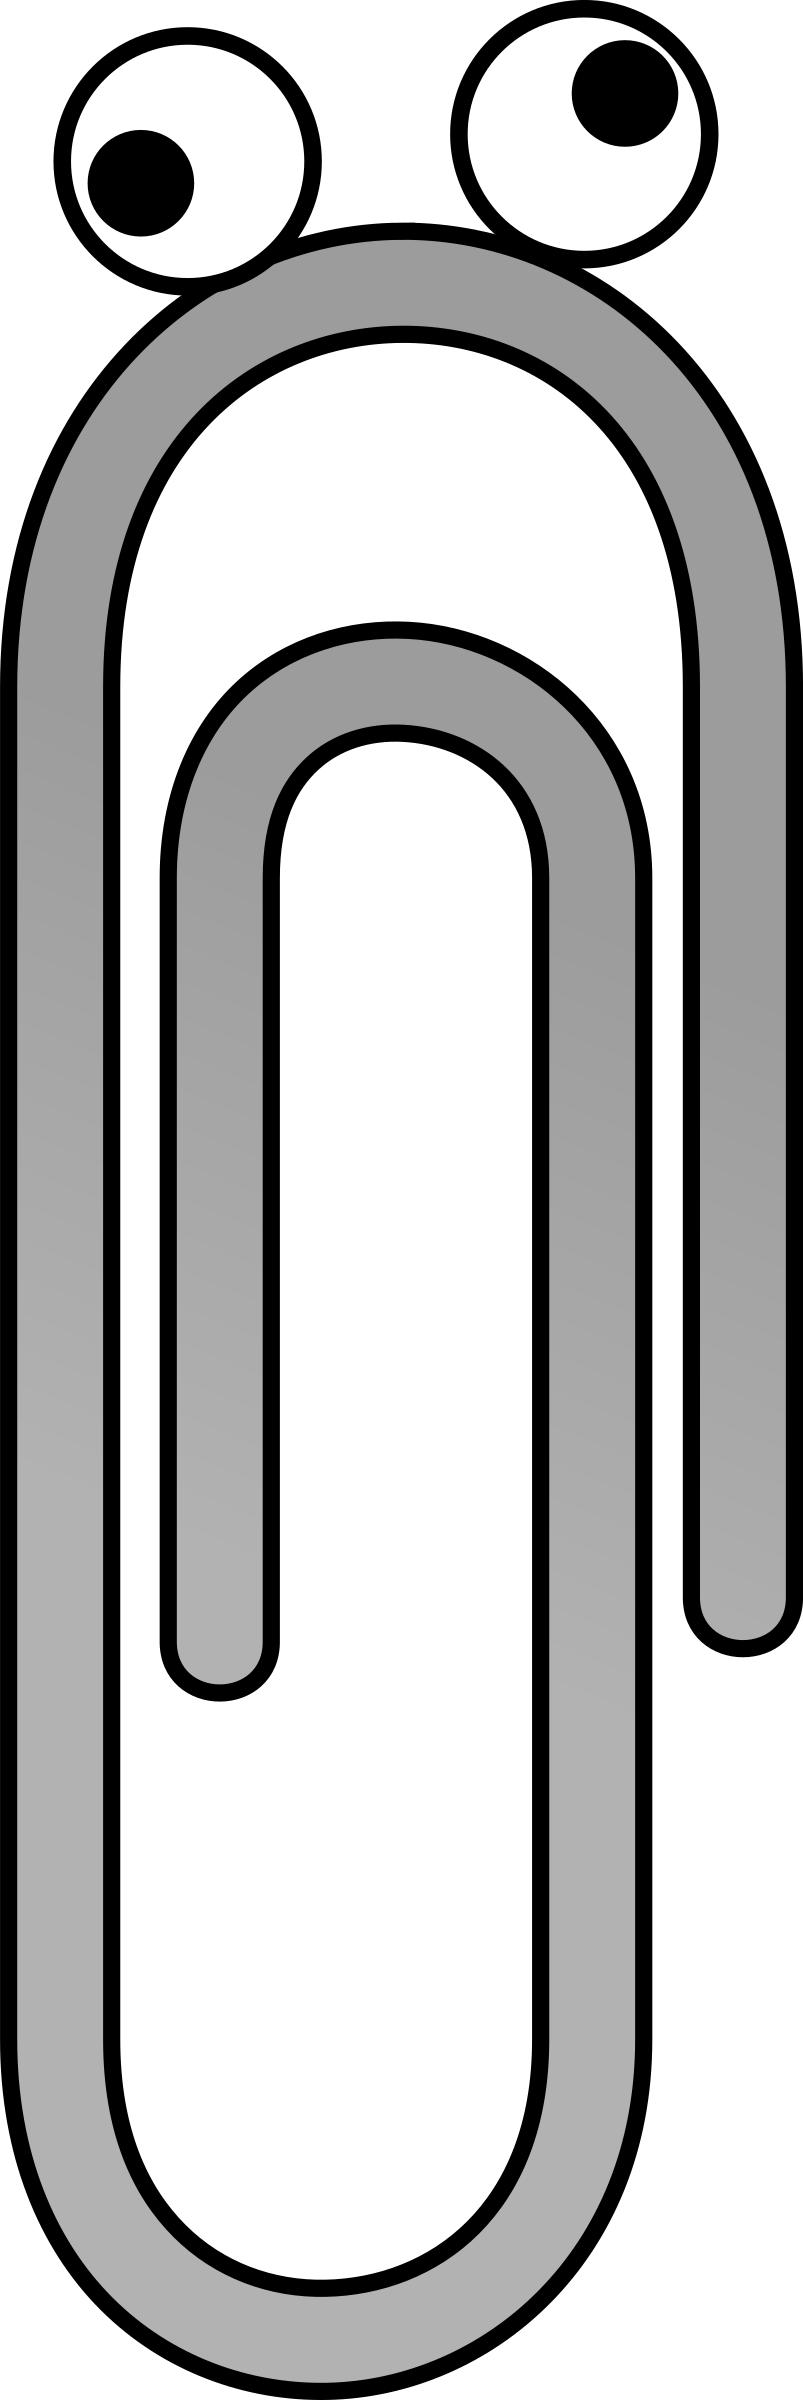 Crazy paperclip png